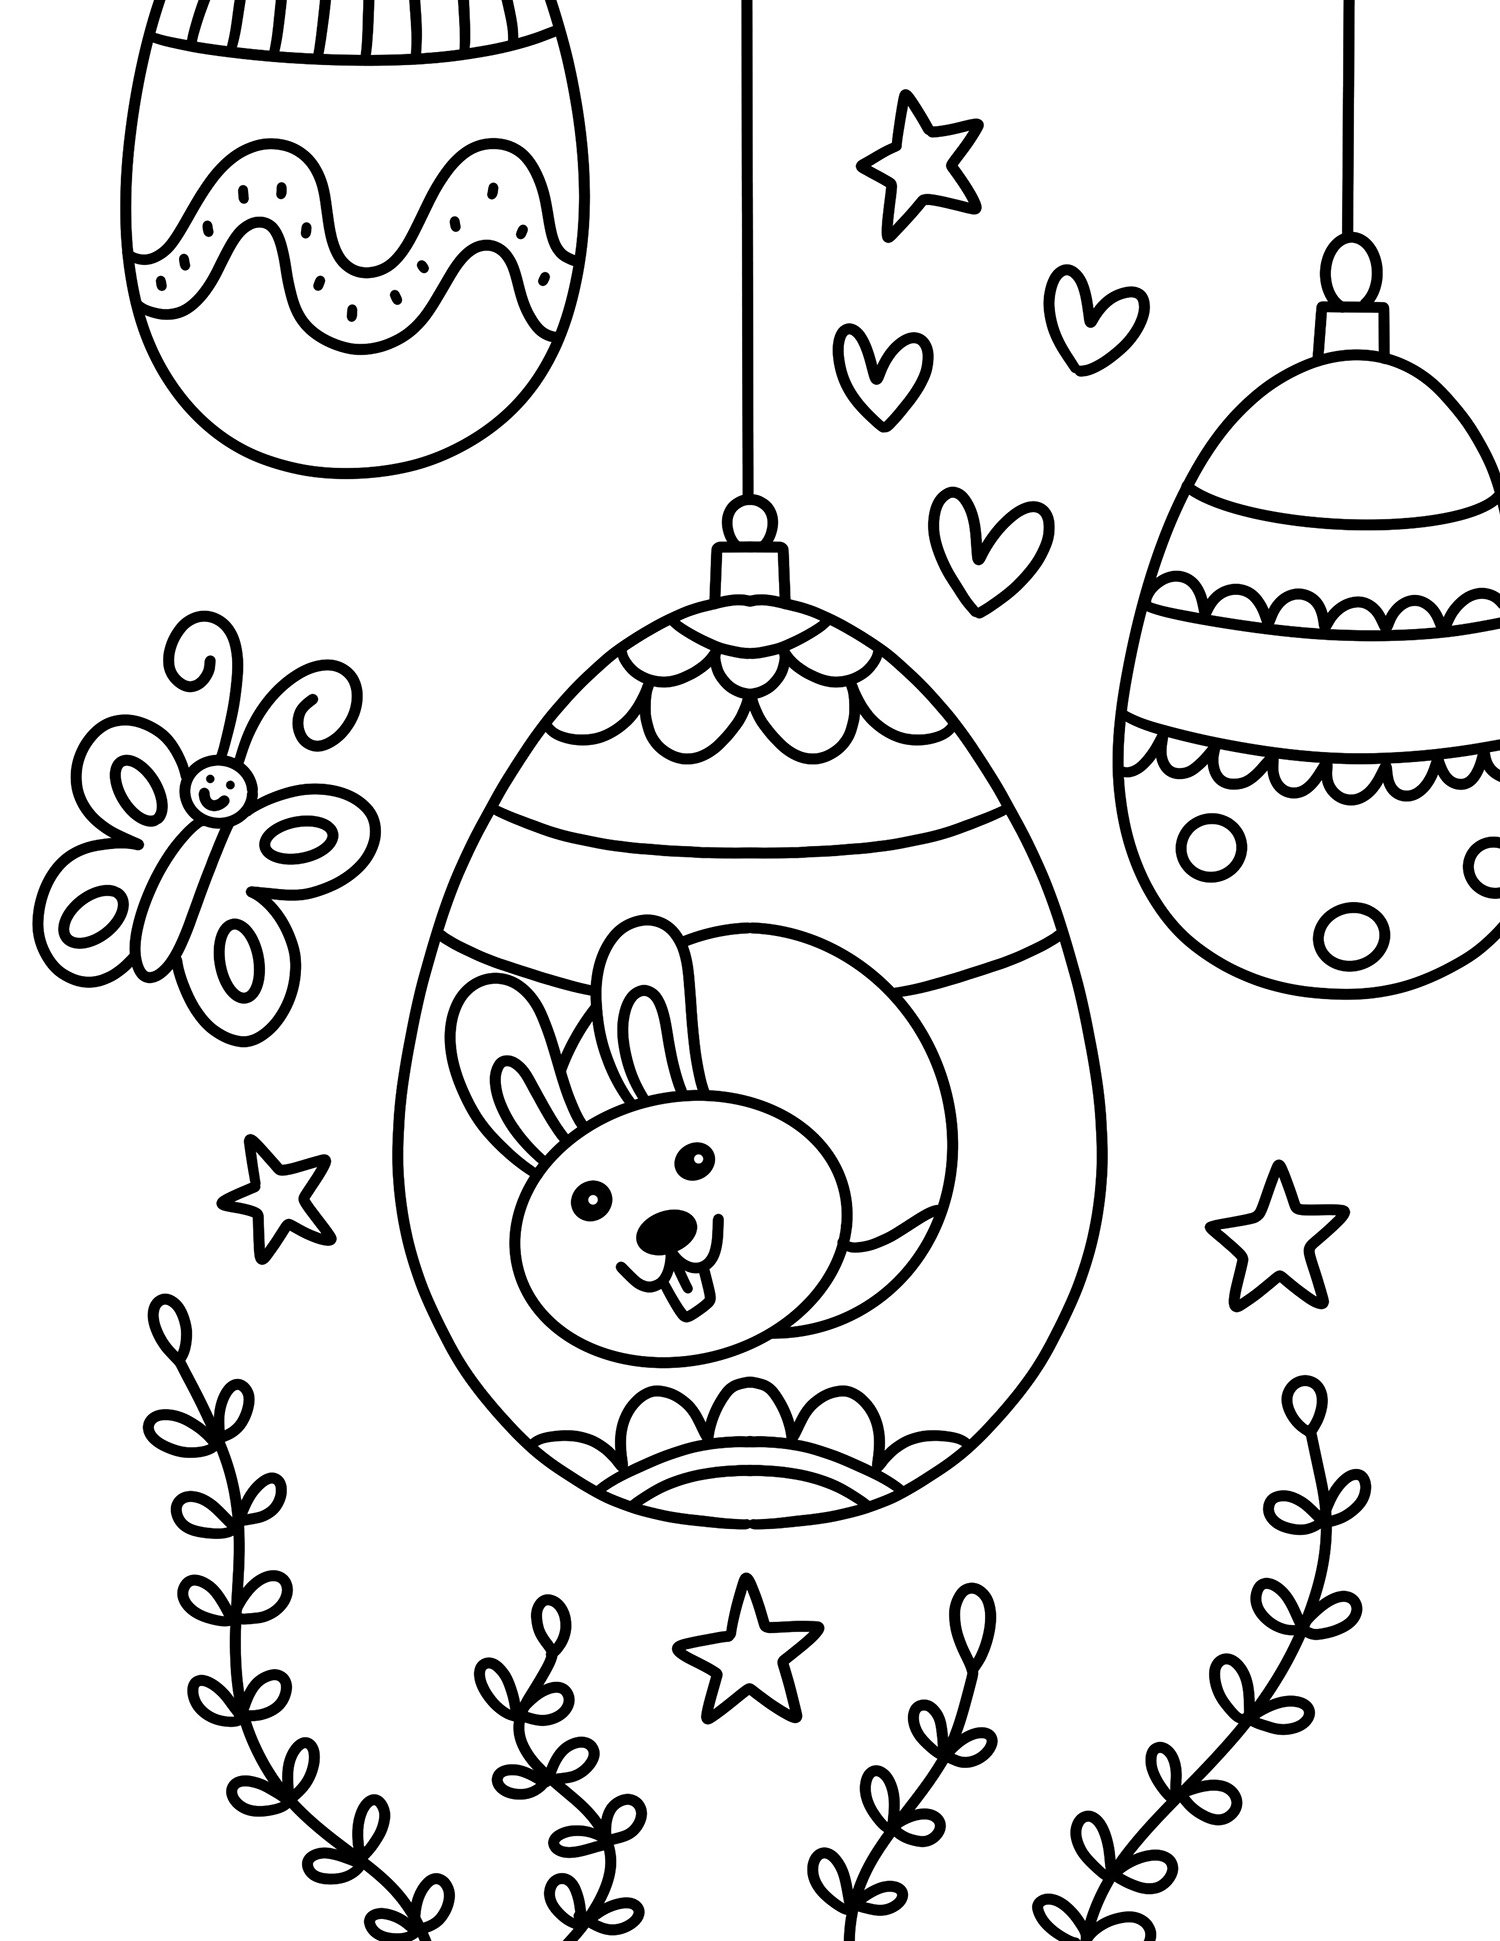 Coloring : Uncategorized Freetable Easter Coloring Page For